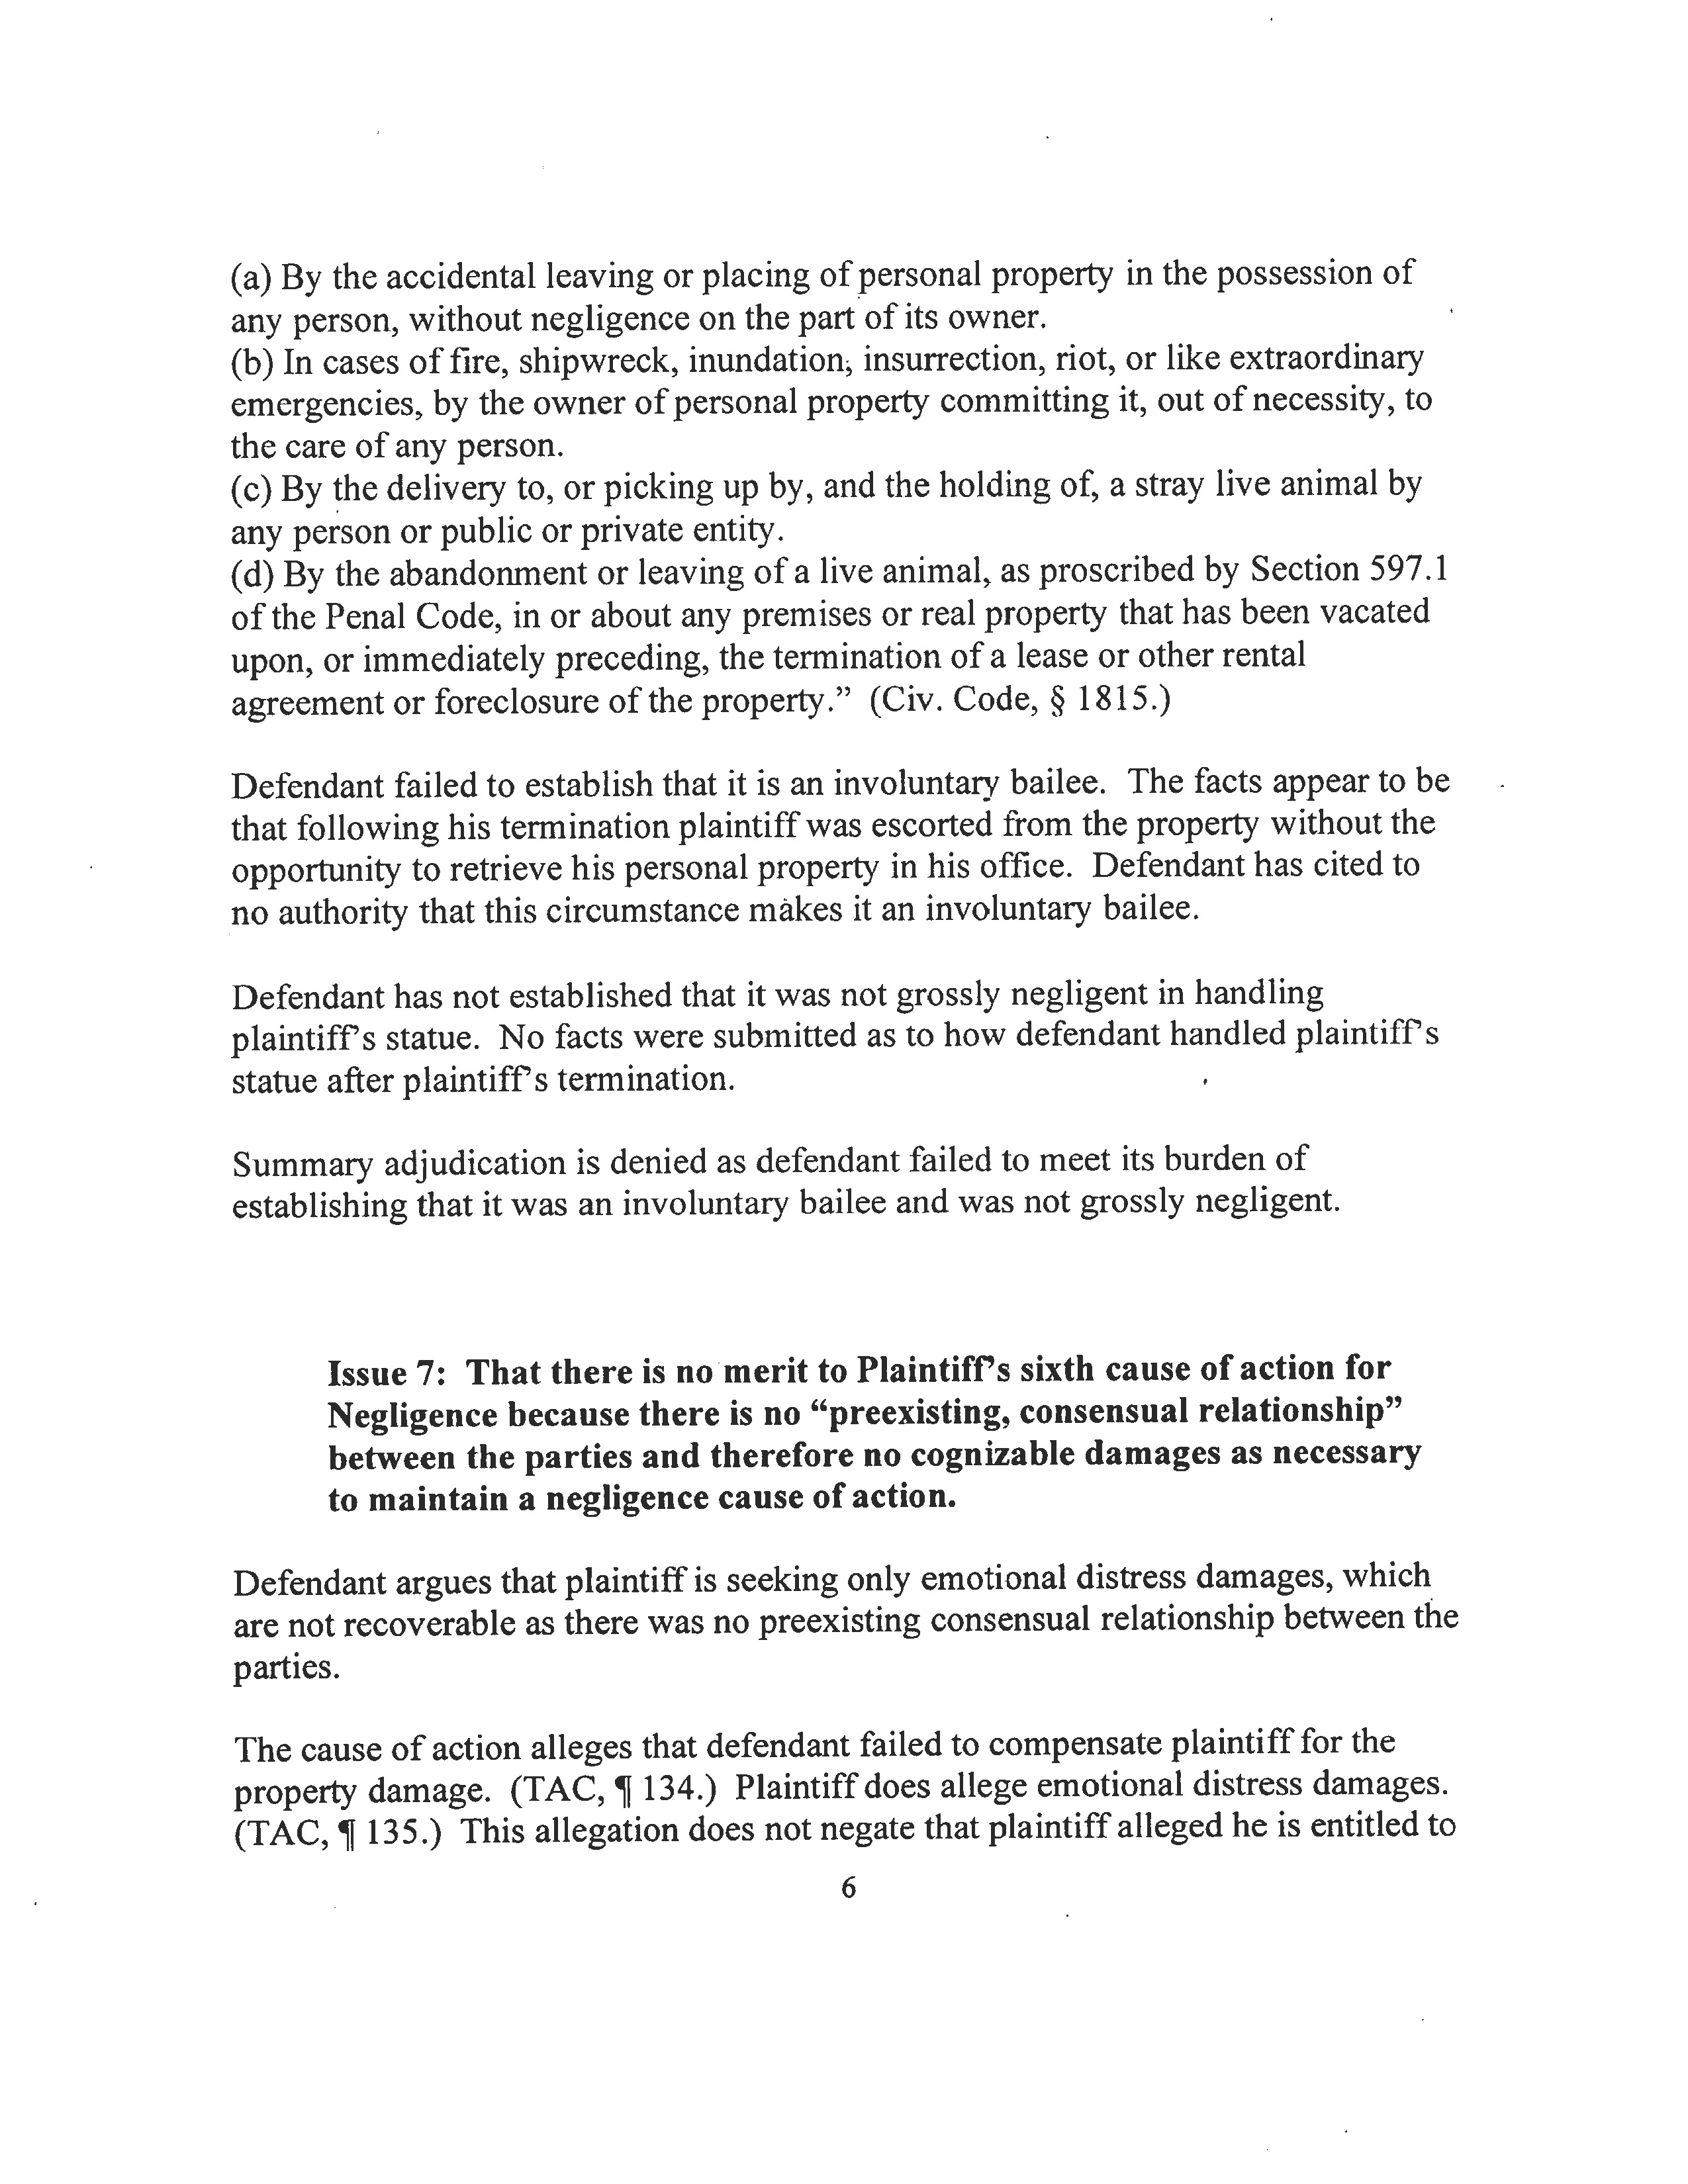 Court Ruling on Pinscreen's and Hao Li's Motion for Summary Judgment - Full Page 6